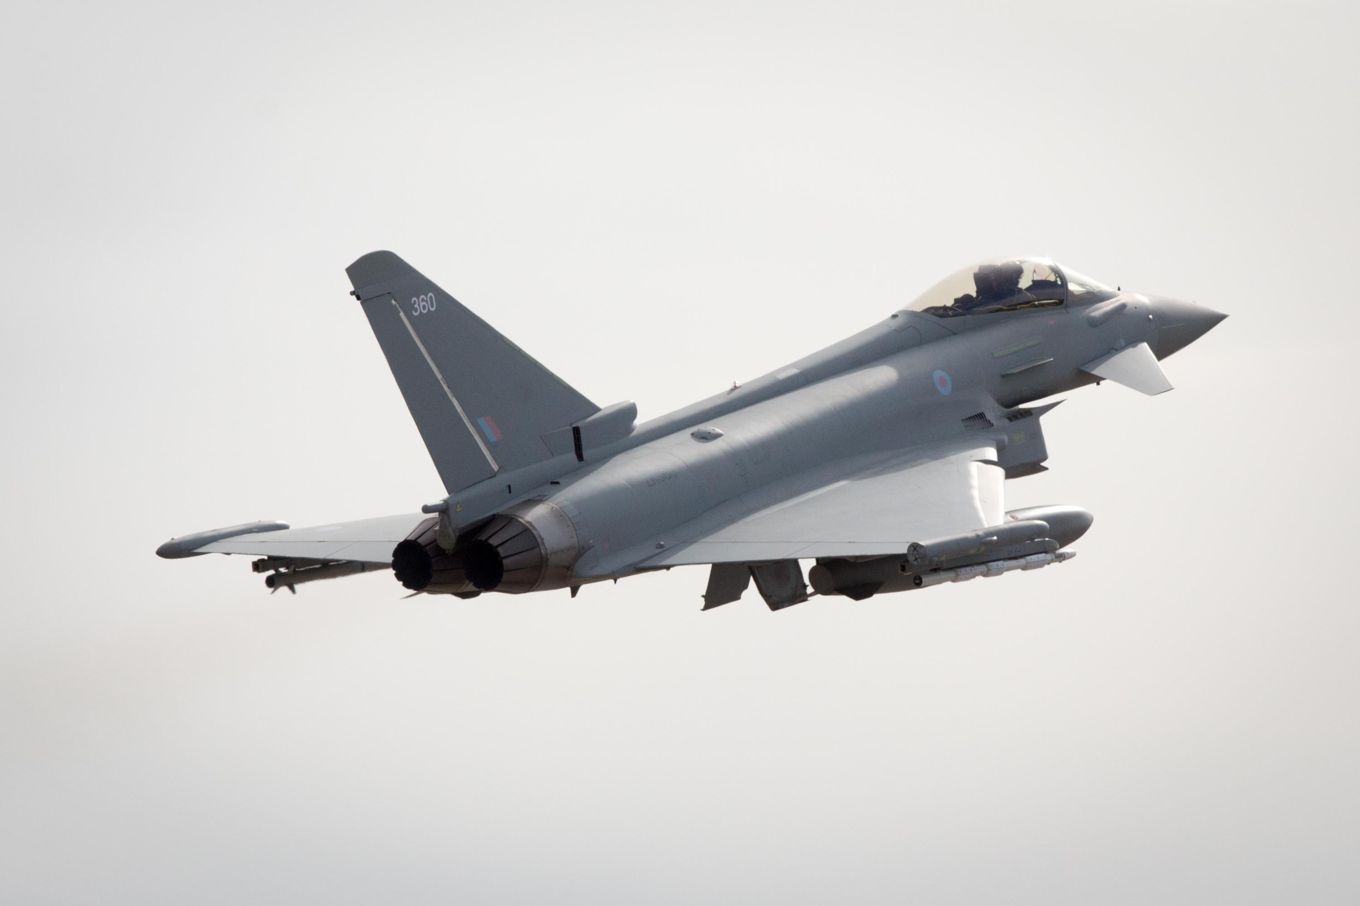 A Typhoon on a sortie as part of ACE